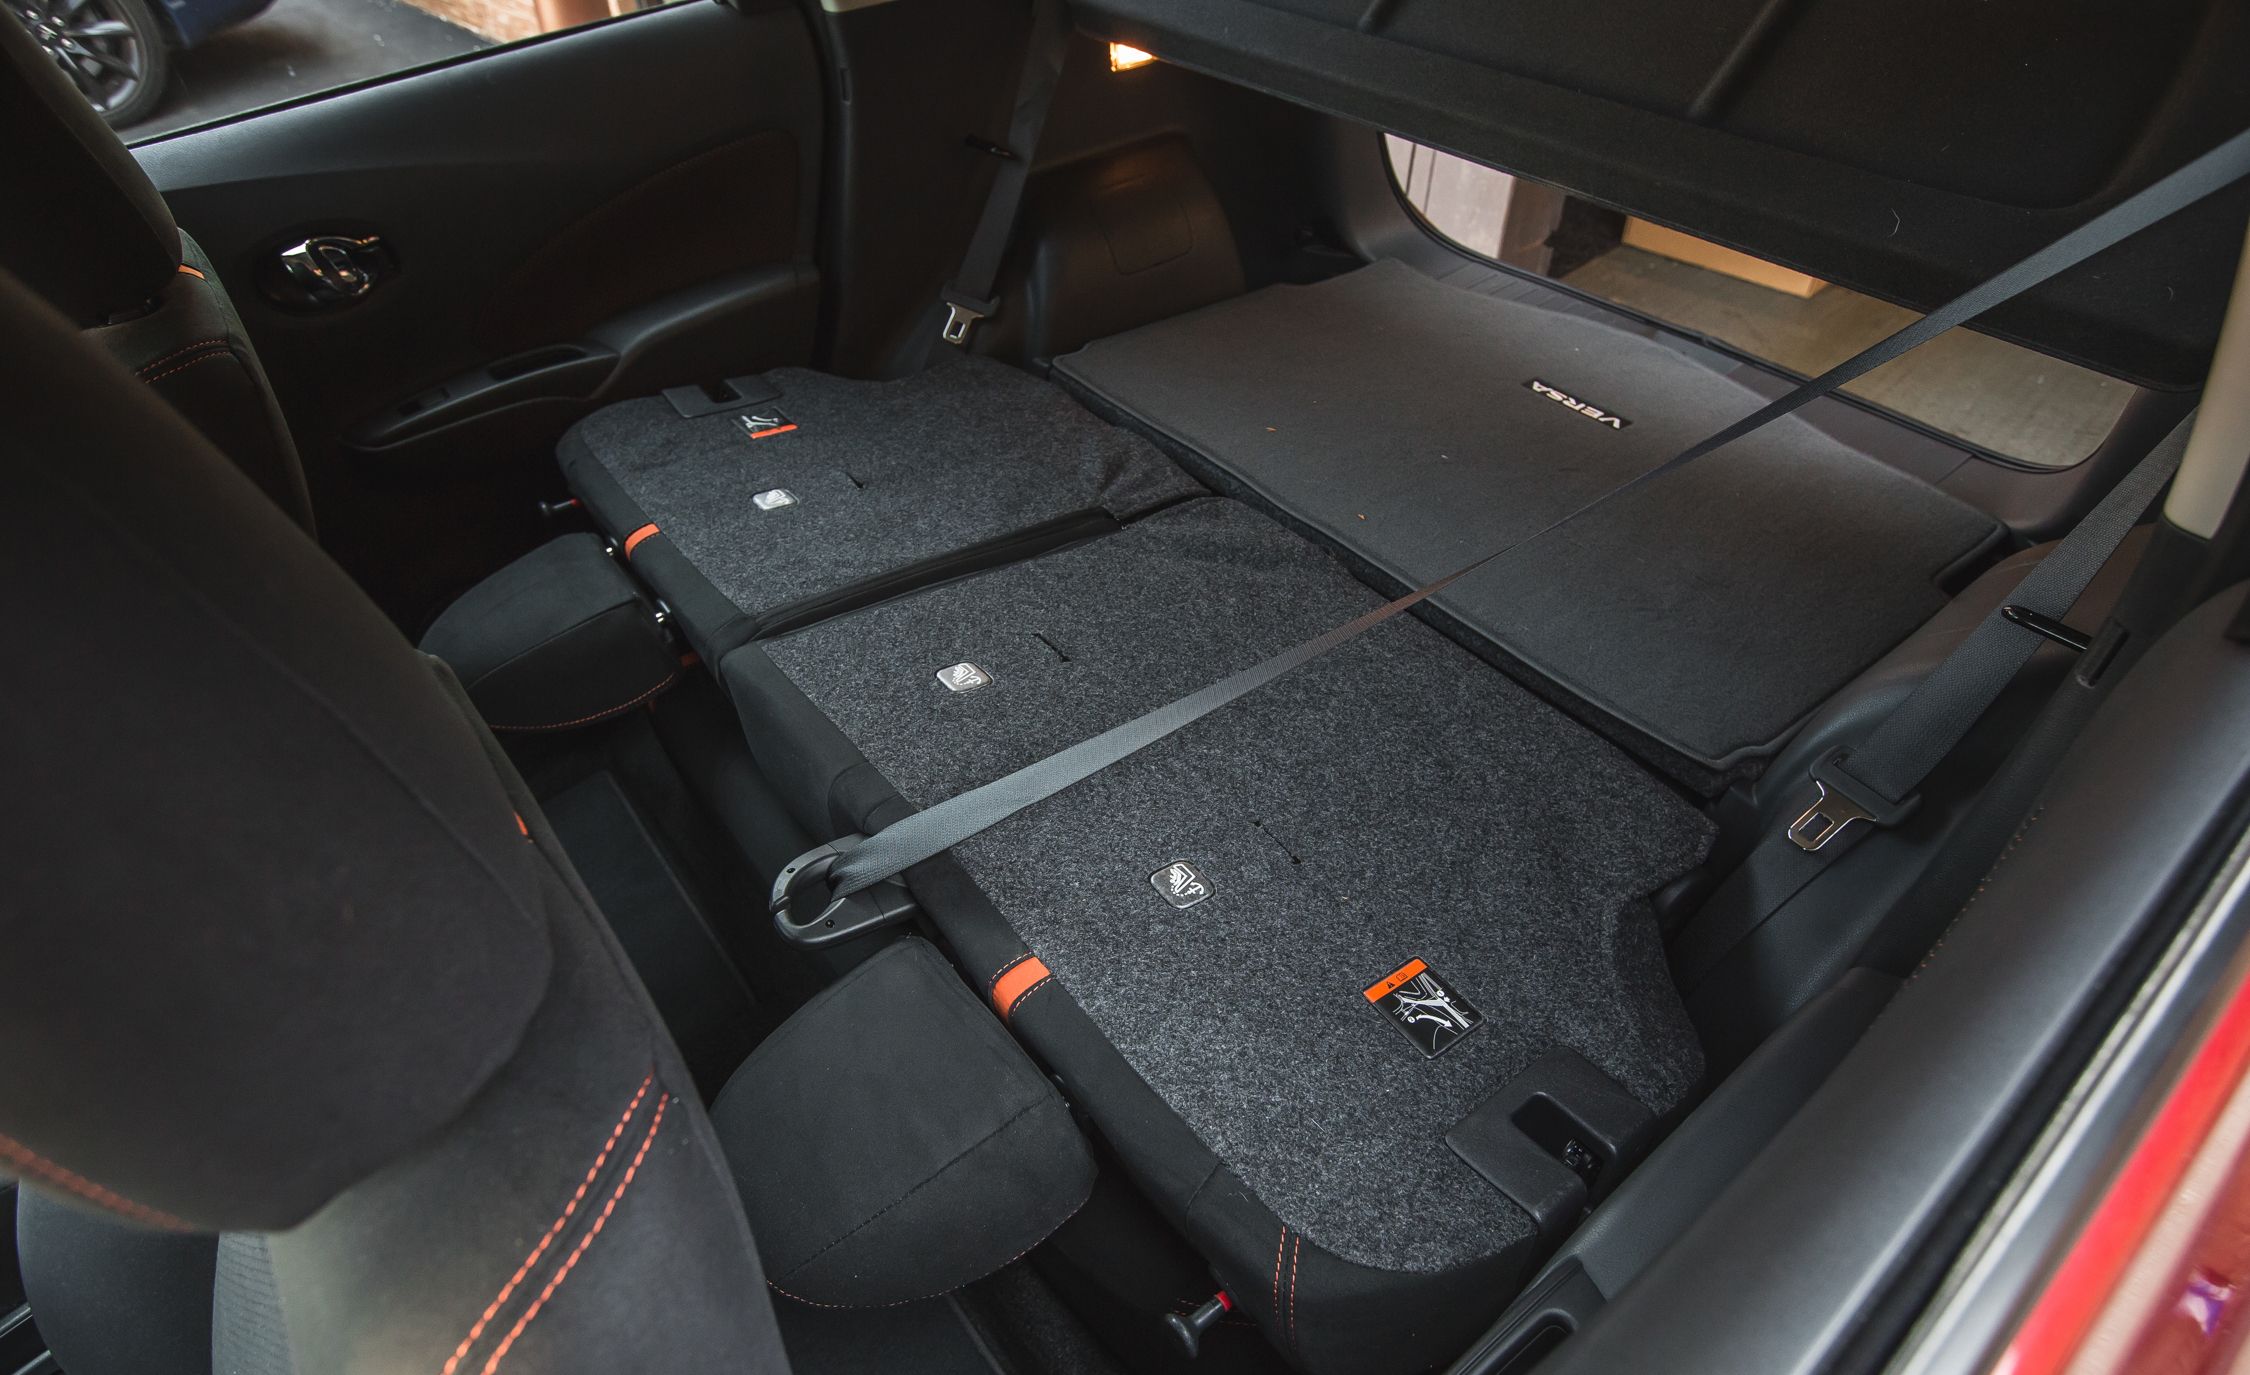 2018 Nissan Versa Note Review Cargo Space and Storage